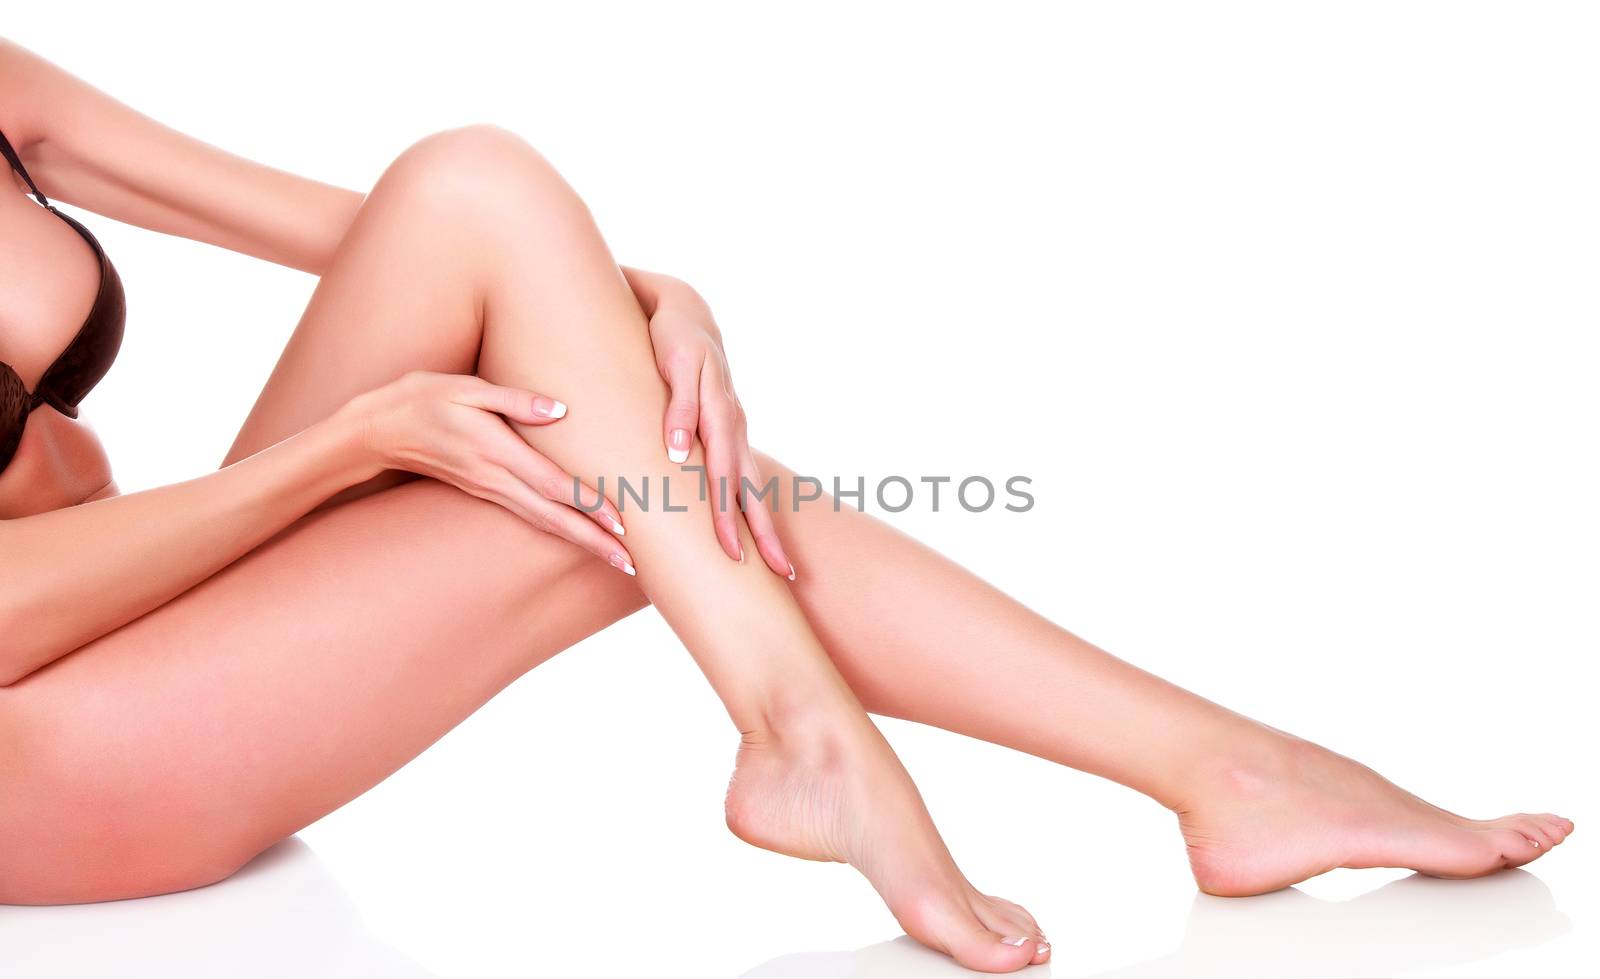 Woman's legs and hands, isolated on white background